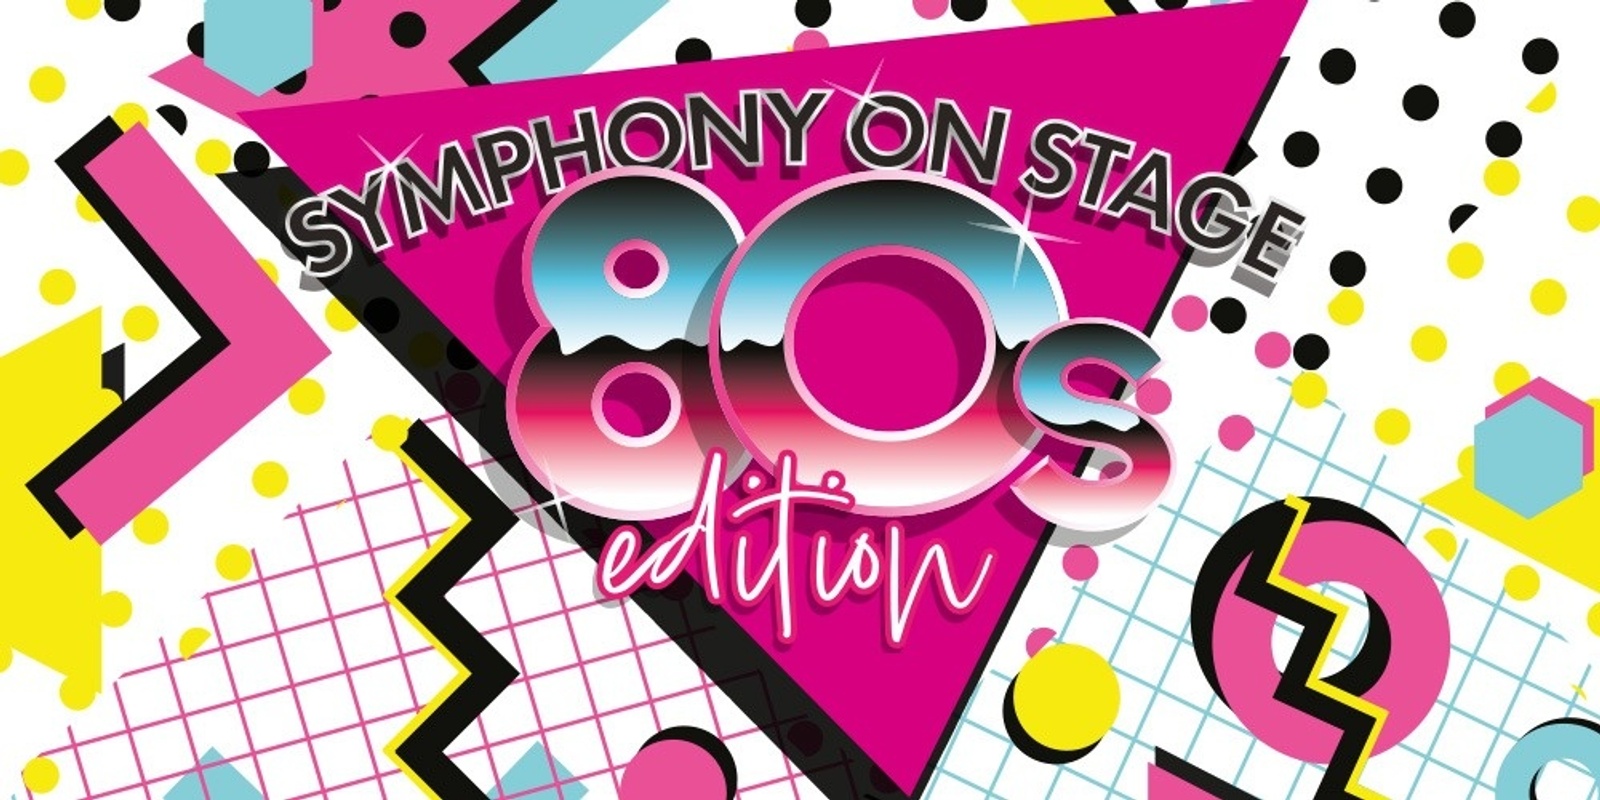 Symphony on Stage the 80's Edition